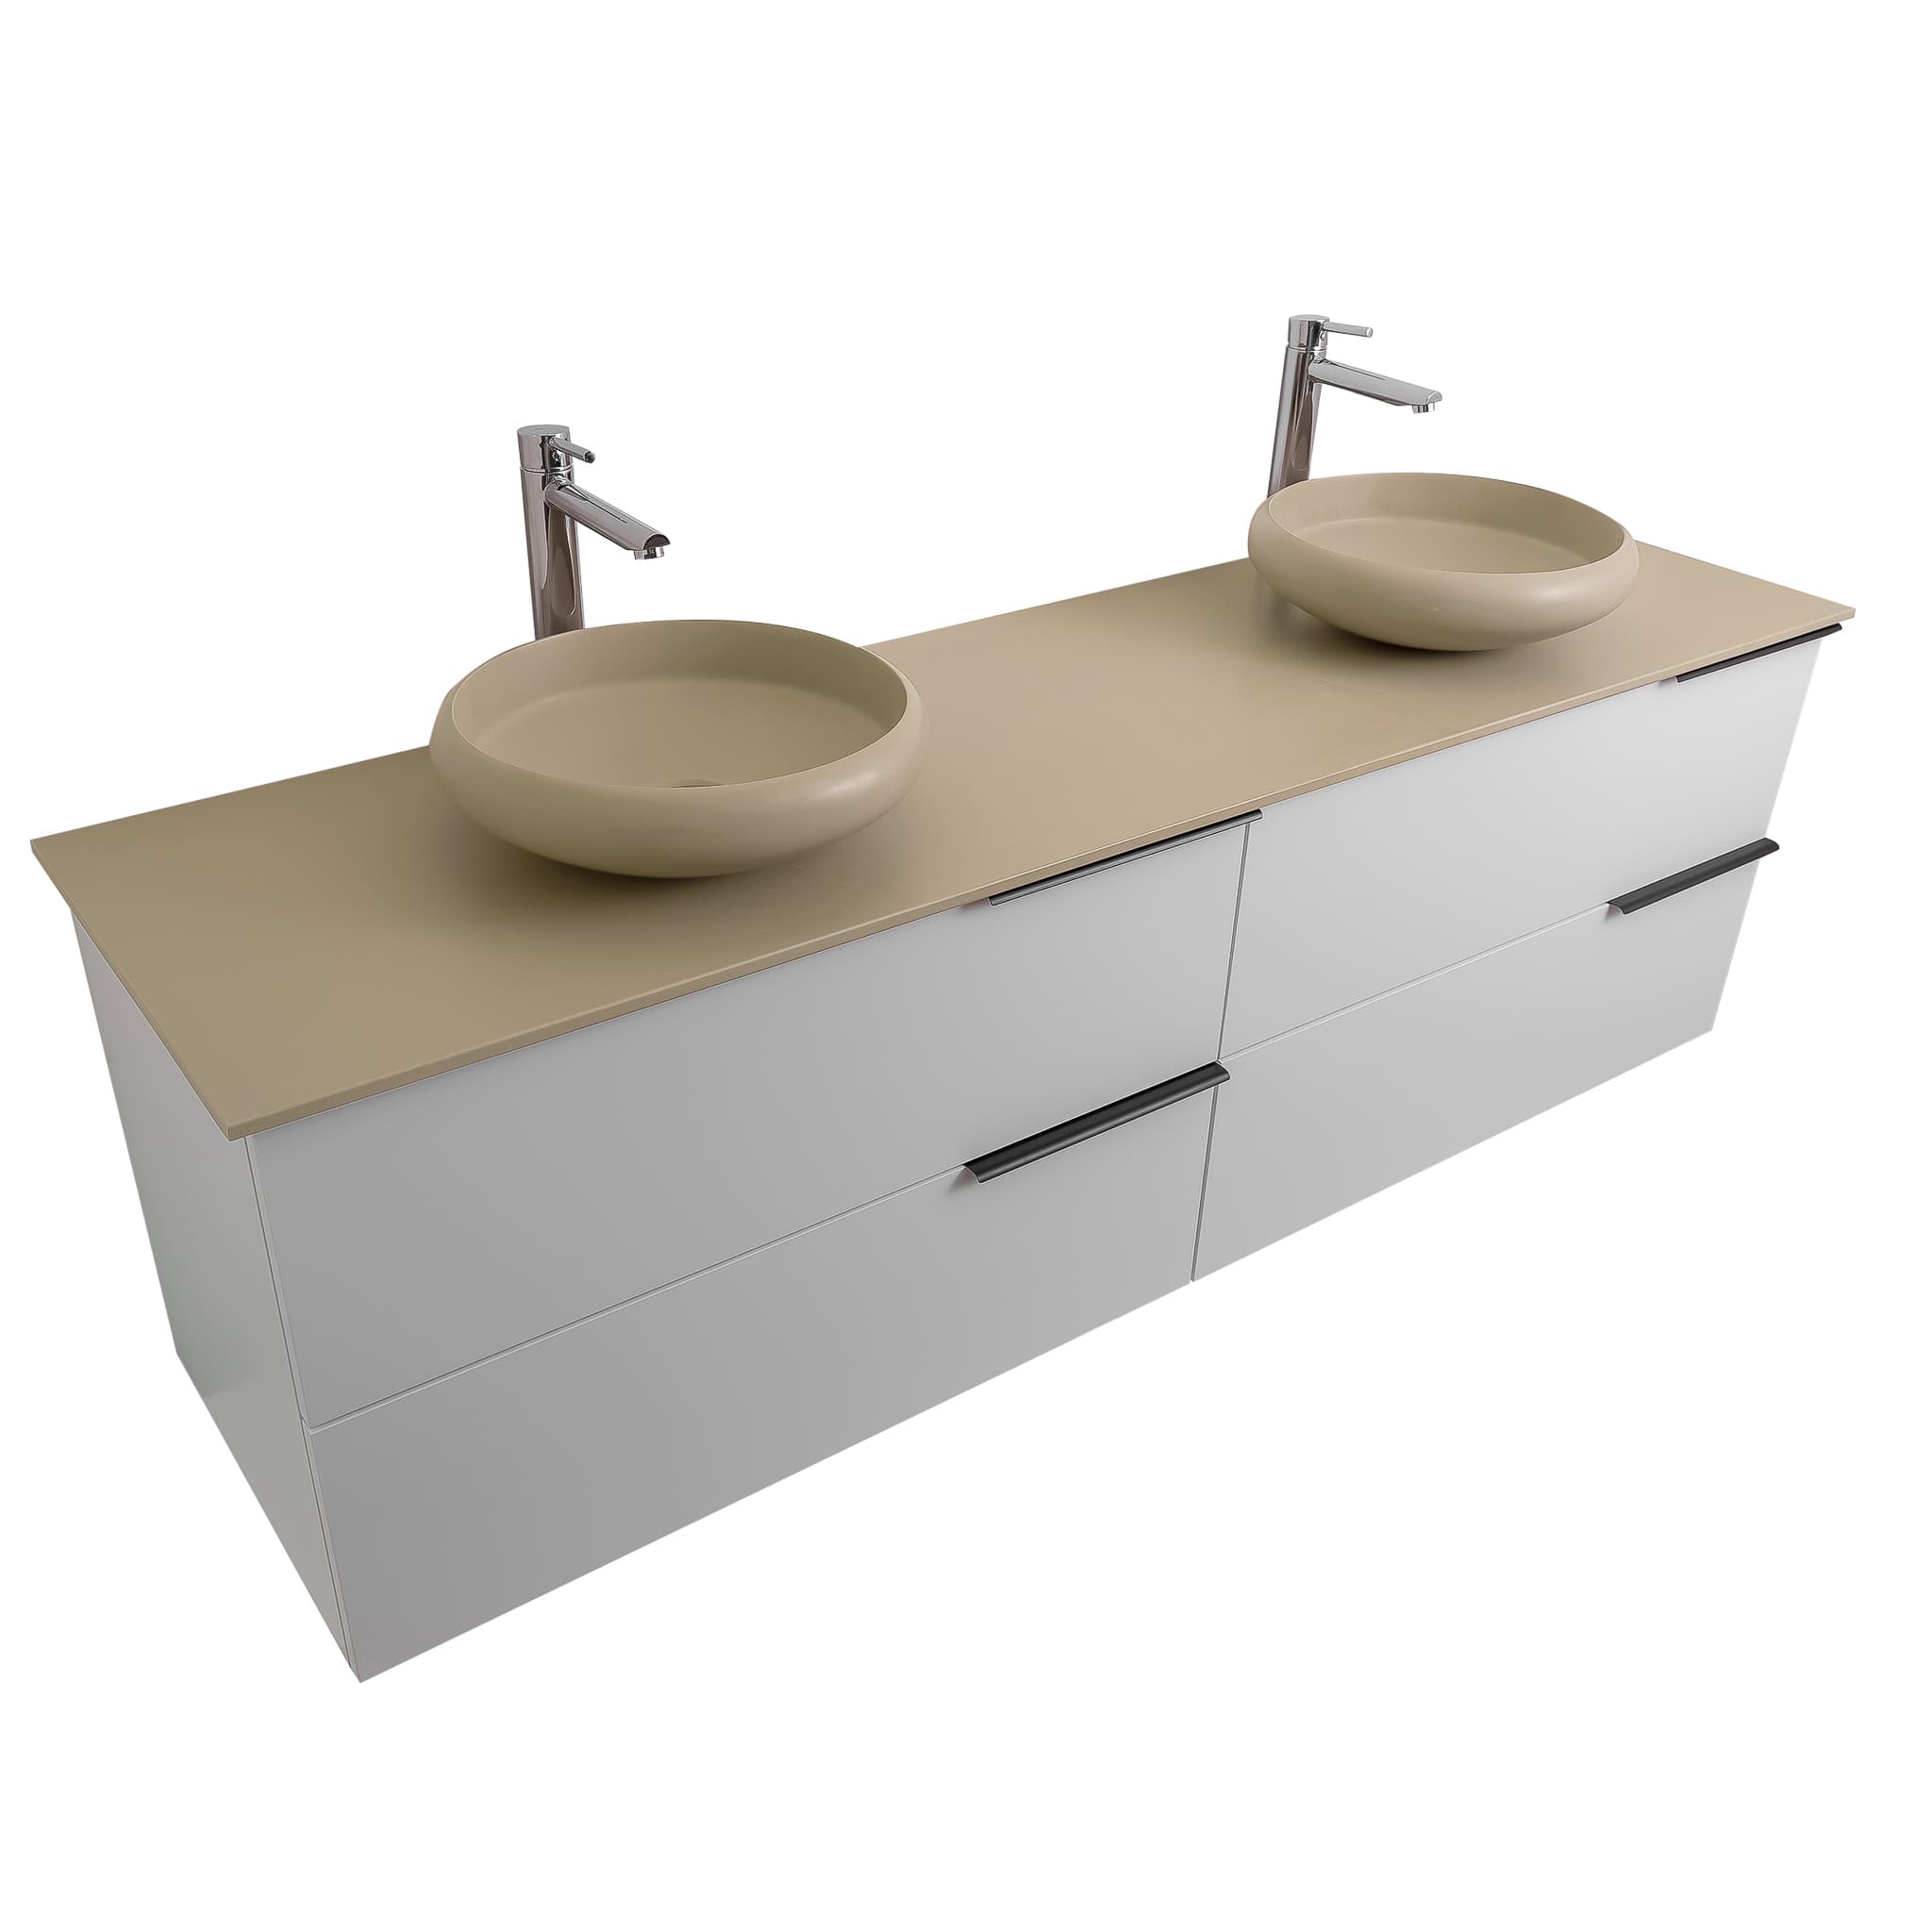 Mallorca 63 Matte White Cabinet, Solid Surface Flat Taupe Counter And Two Round Solid Surface Taupe Basin 1153, Wall Mounted Modern Vanity Set